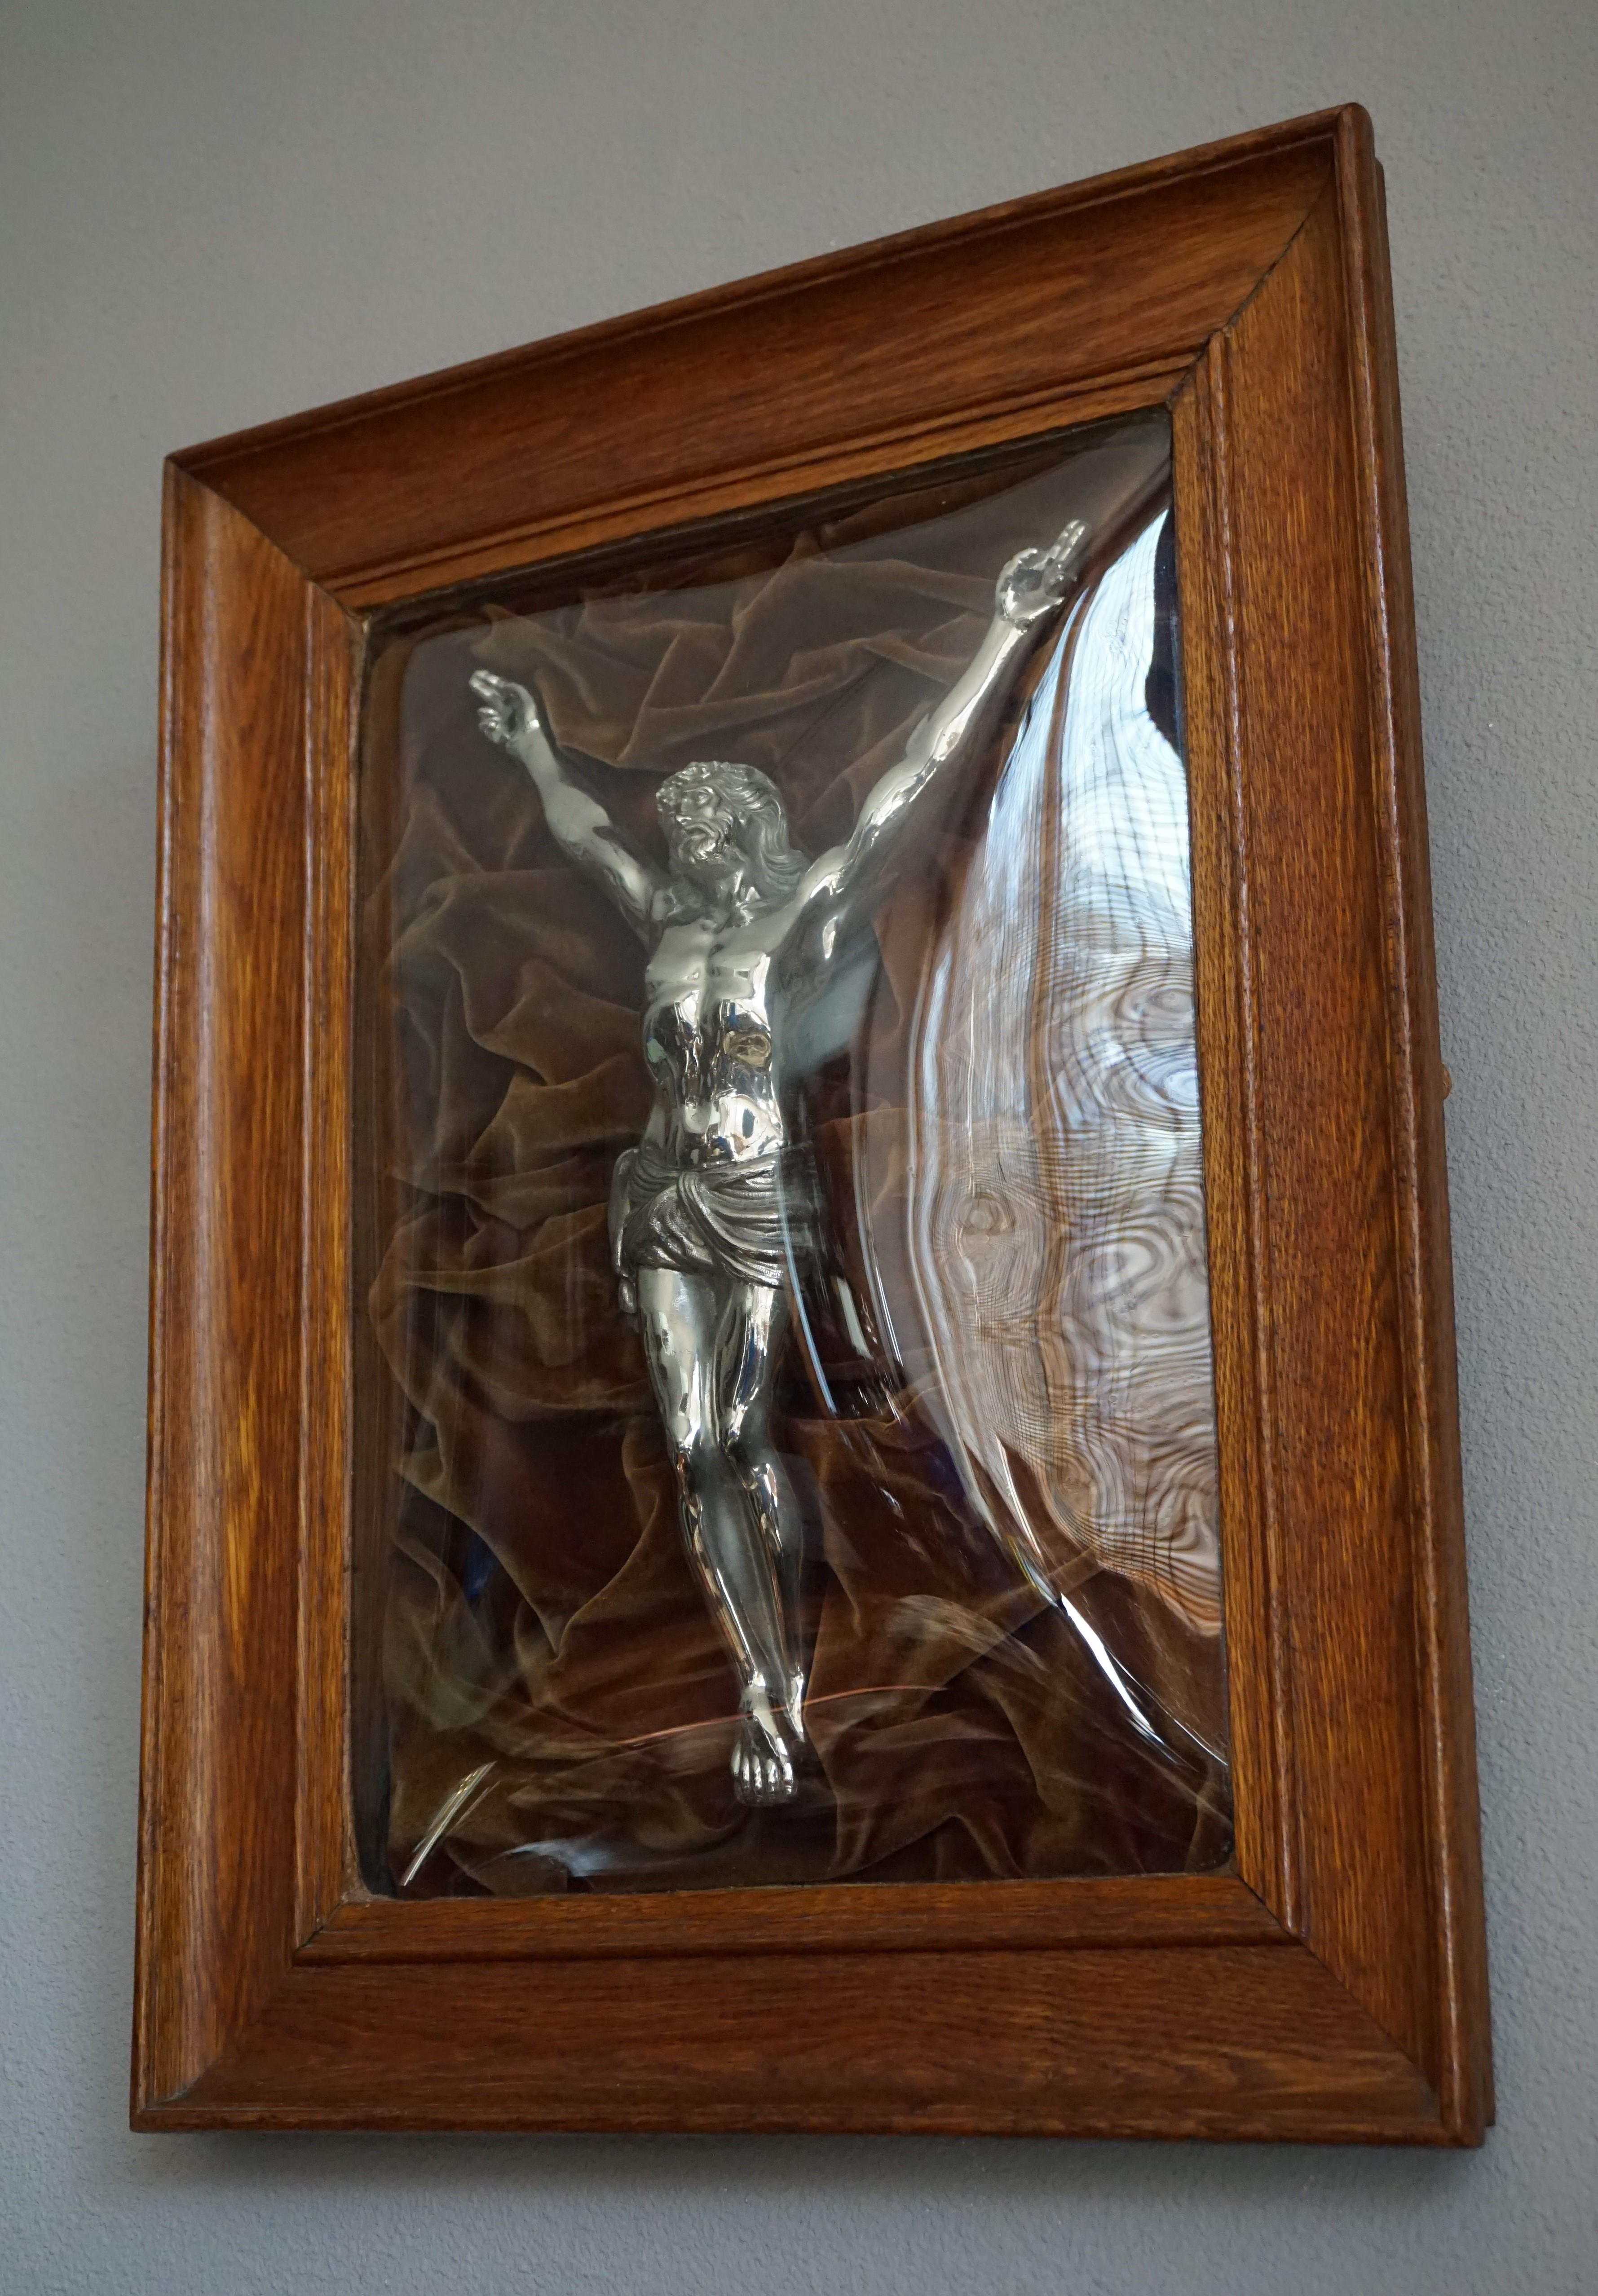 19th century 'Corpus Christi' in its original, mouth blown glass and solid oak frame.

For a piece that was all handcrafted in the late 19th century, this unique work of religious art is in museum quality condition. Especially for the large and